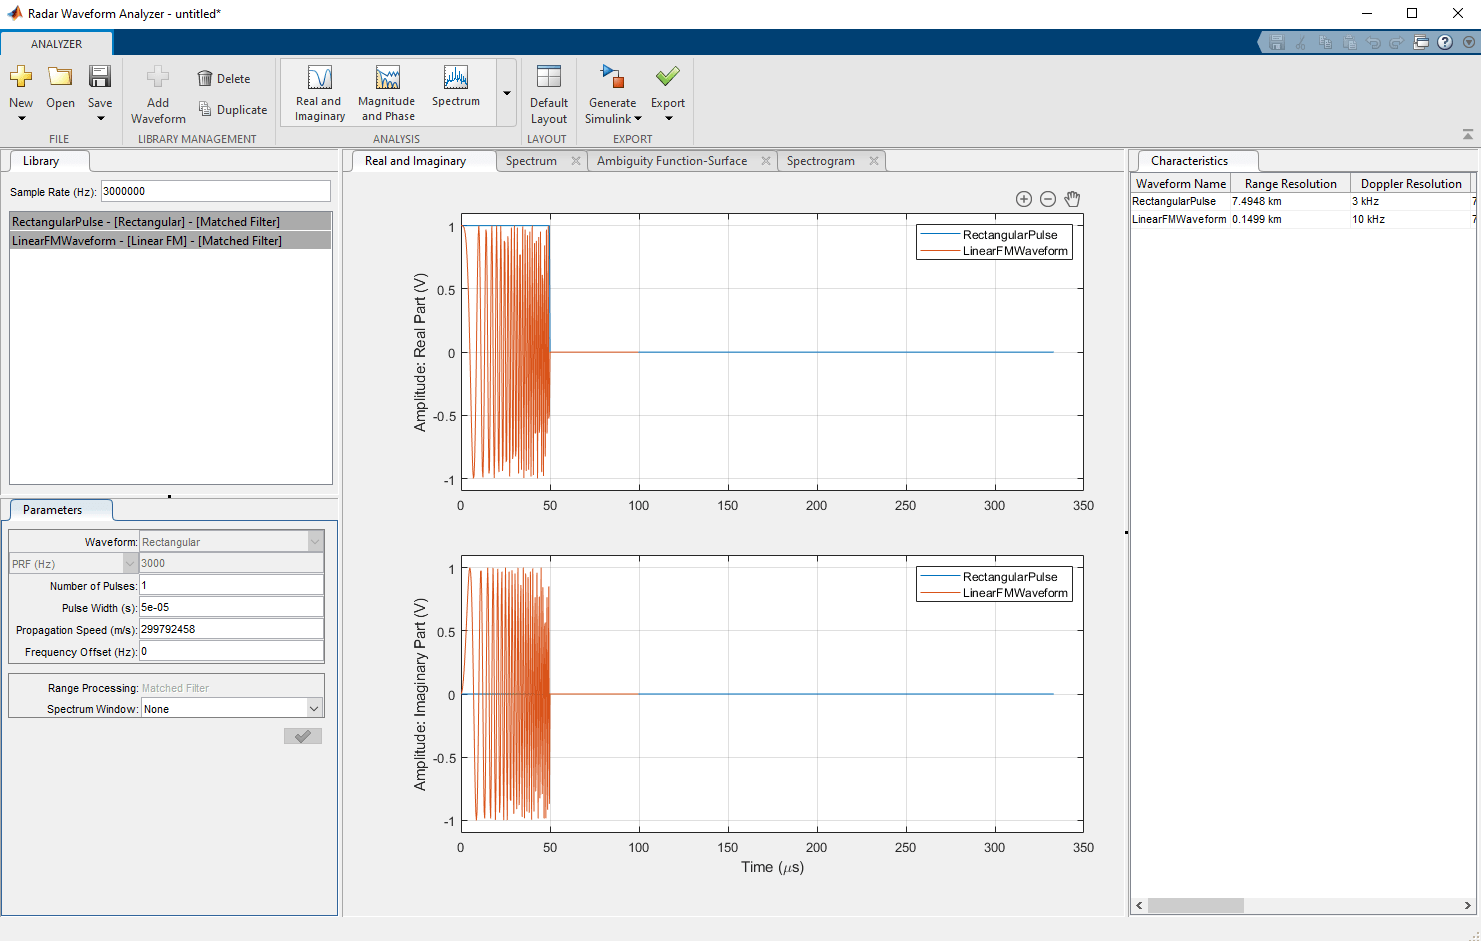 Display two plots simultaneously.